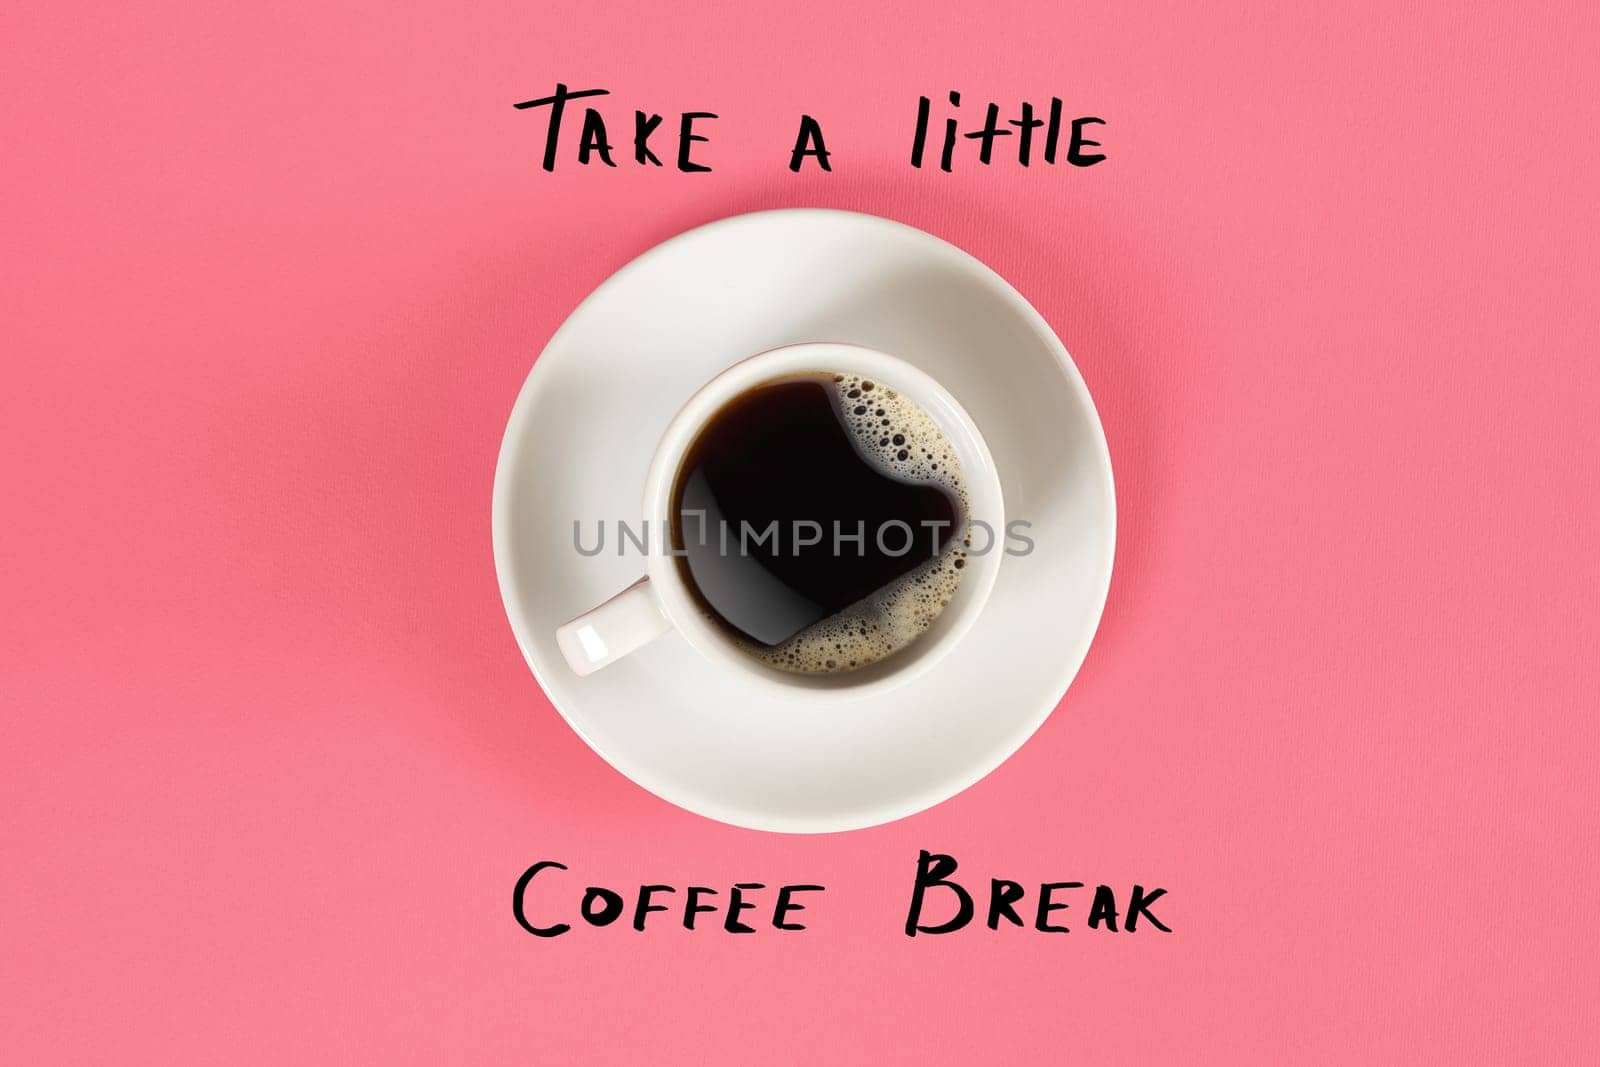 Top view of cup of black coffee and Take a little coffee break lettering isolated on pink background. Still life. Mock up. Flat lay